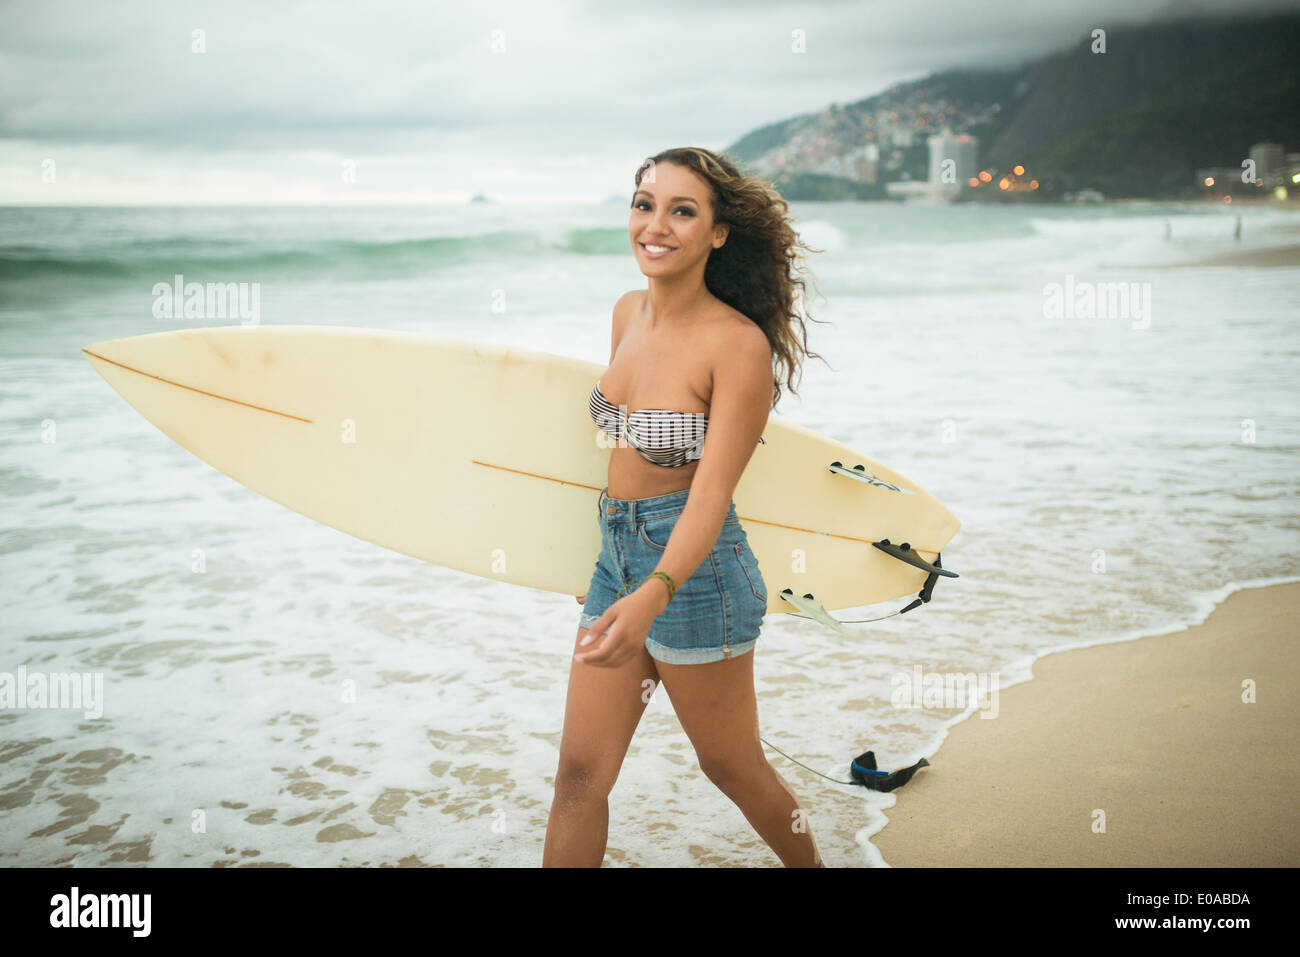 Young woman with surfboard Stock Photo